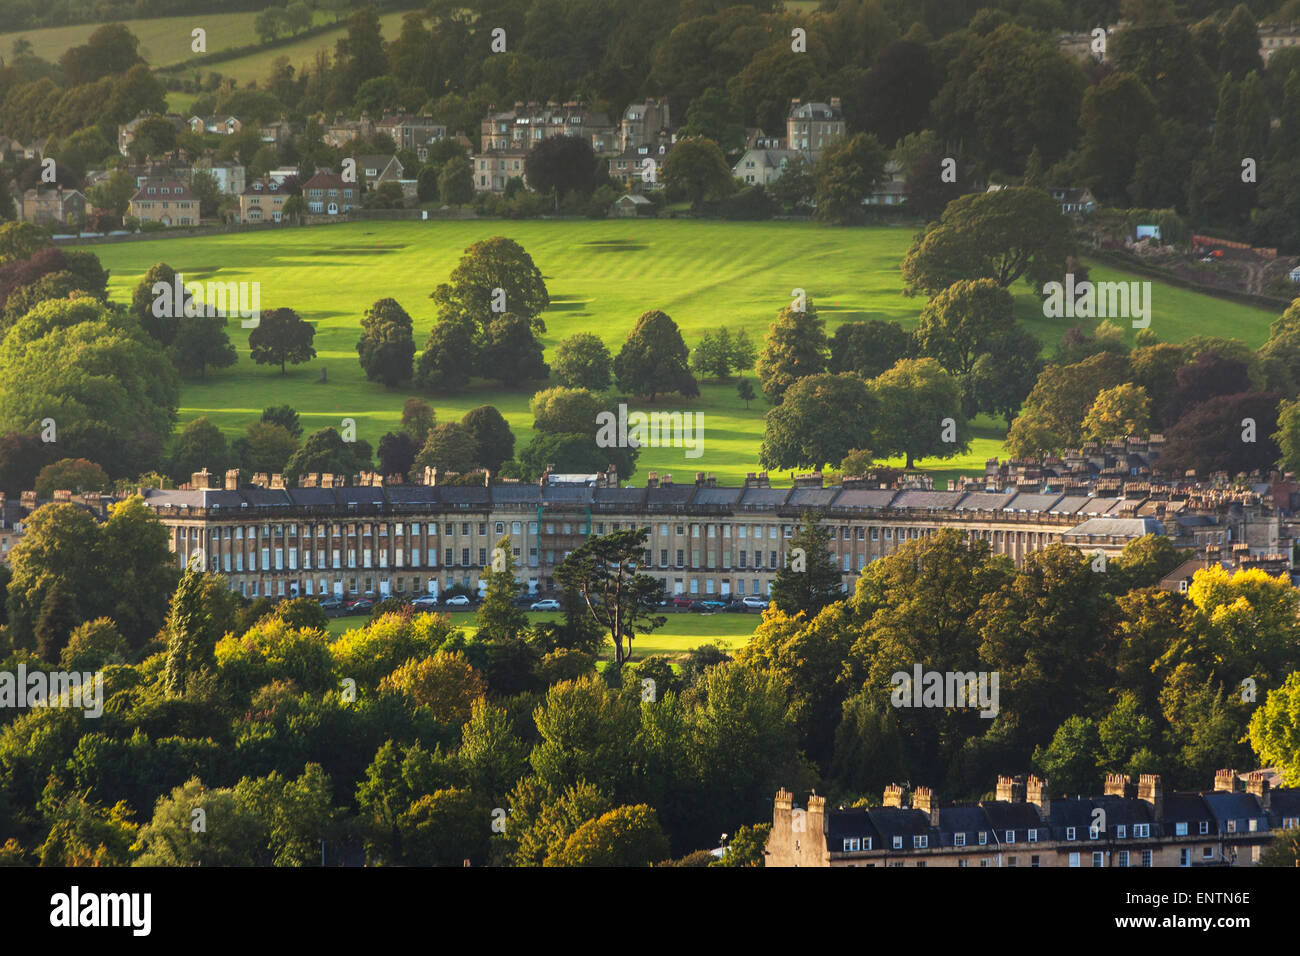 Lansdown Crescent in the city of Bath, UK Stock Photo